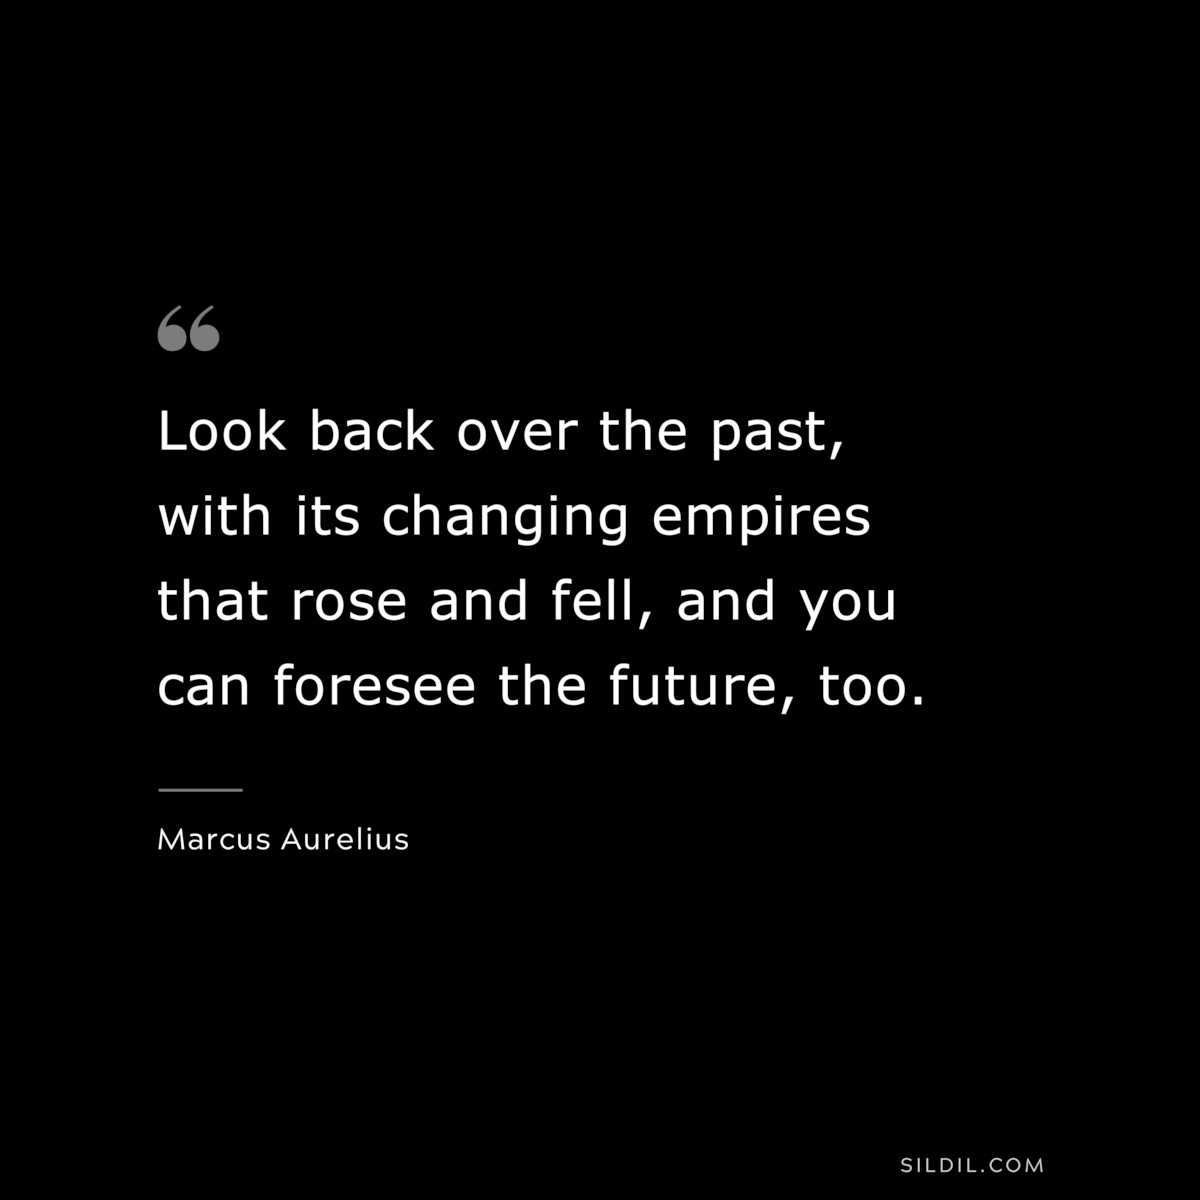 Look back over the past, with its changing empires that rose and fell, and you can foresee the future, too. ― Marcus Aurelius